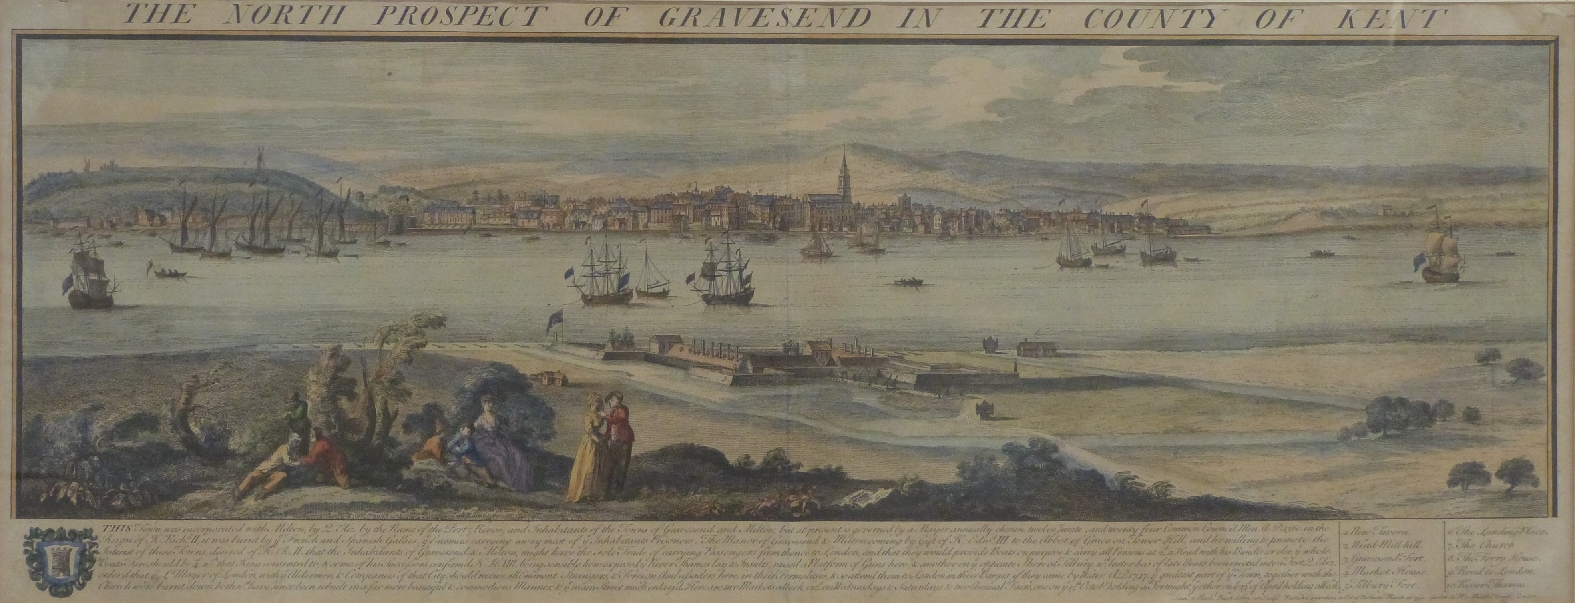 An 18thC coloured engraving The North Prospect of Gravesend in The County of Kent by Samuel and